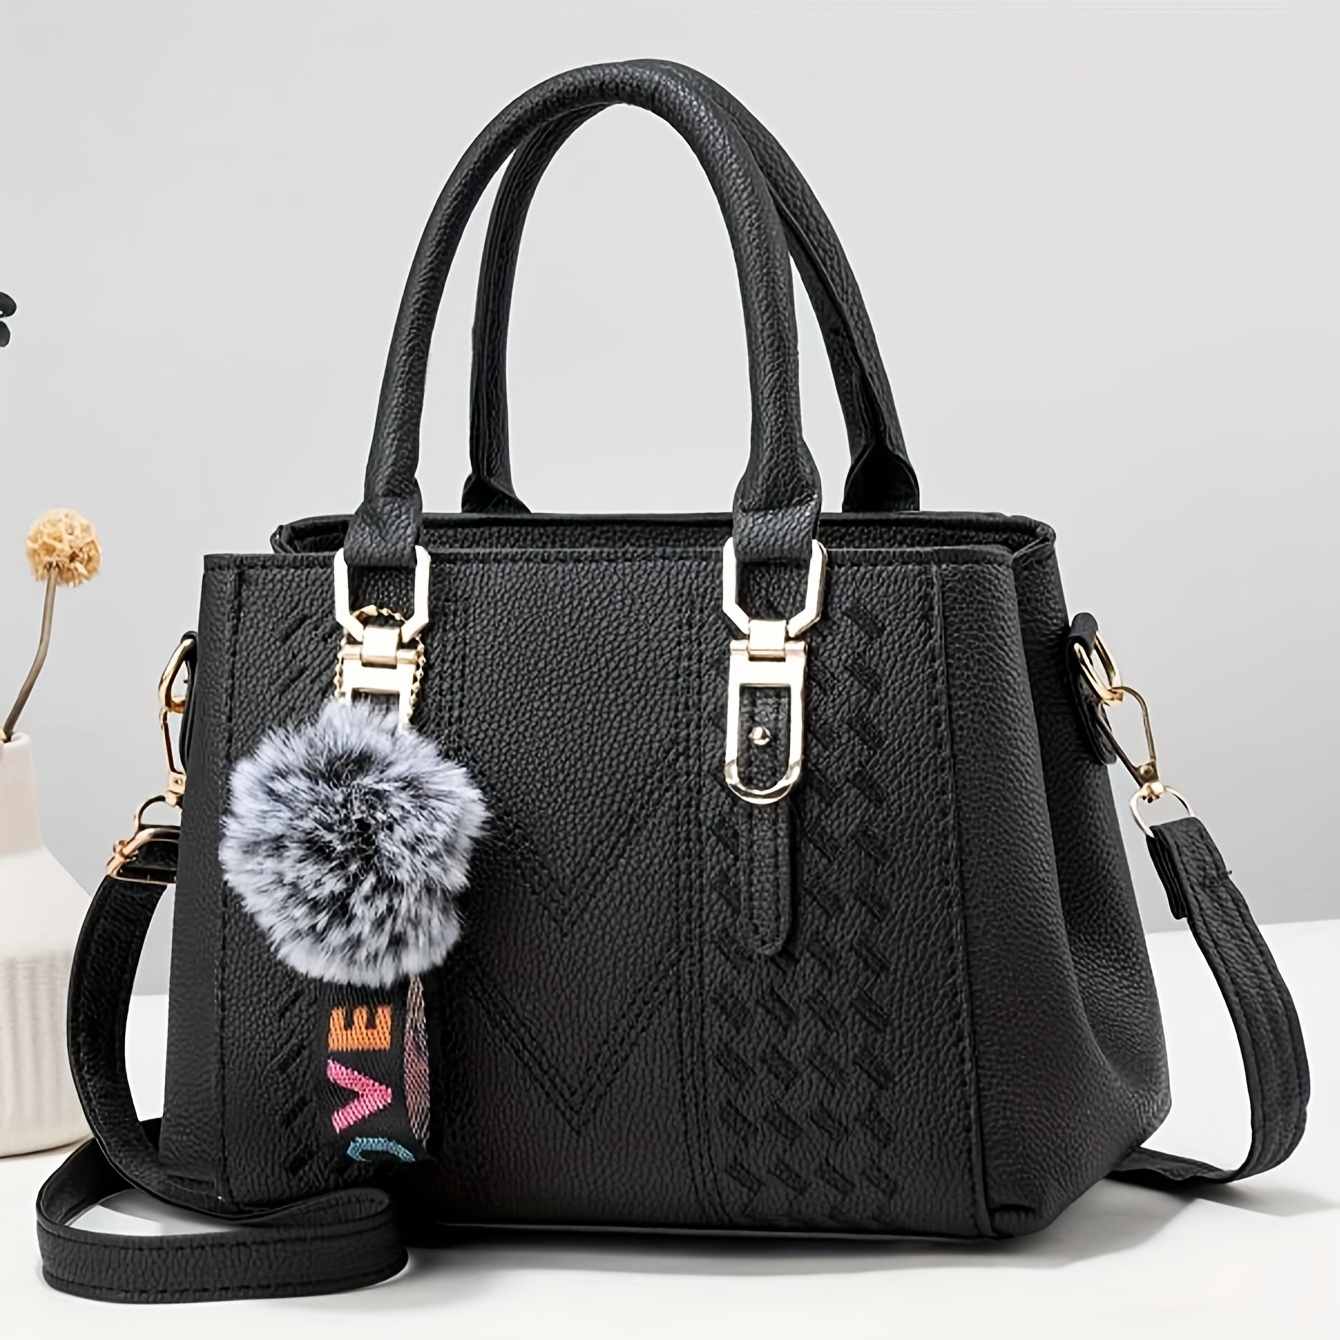 

Elegant Women's Fashion Tote Bag With Pom-pom Charm, Embroidered Faux Leather Handbag, Multi-layer Design, Shoulder & Crossbody Purse For Date And Party